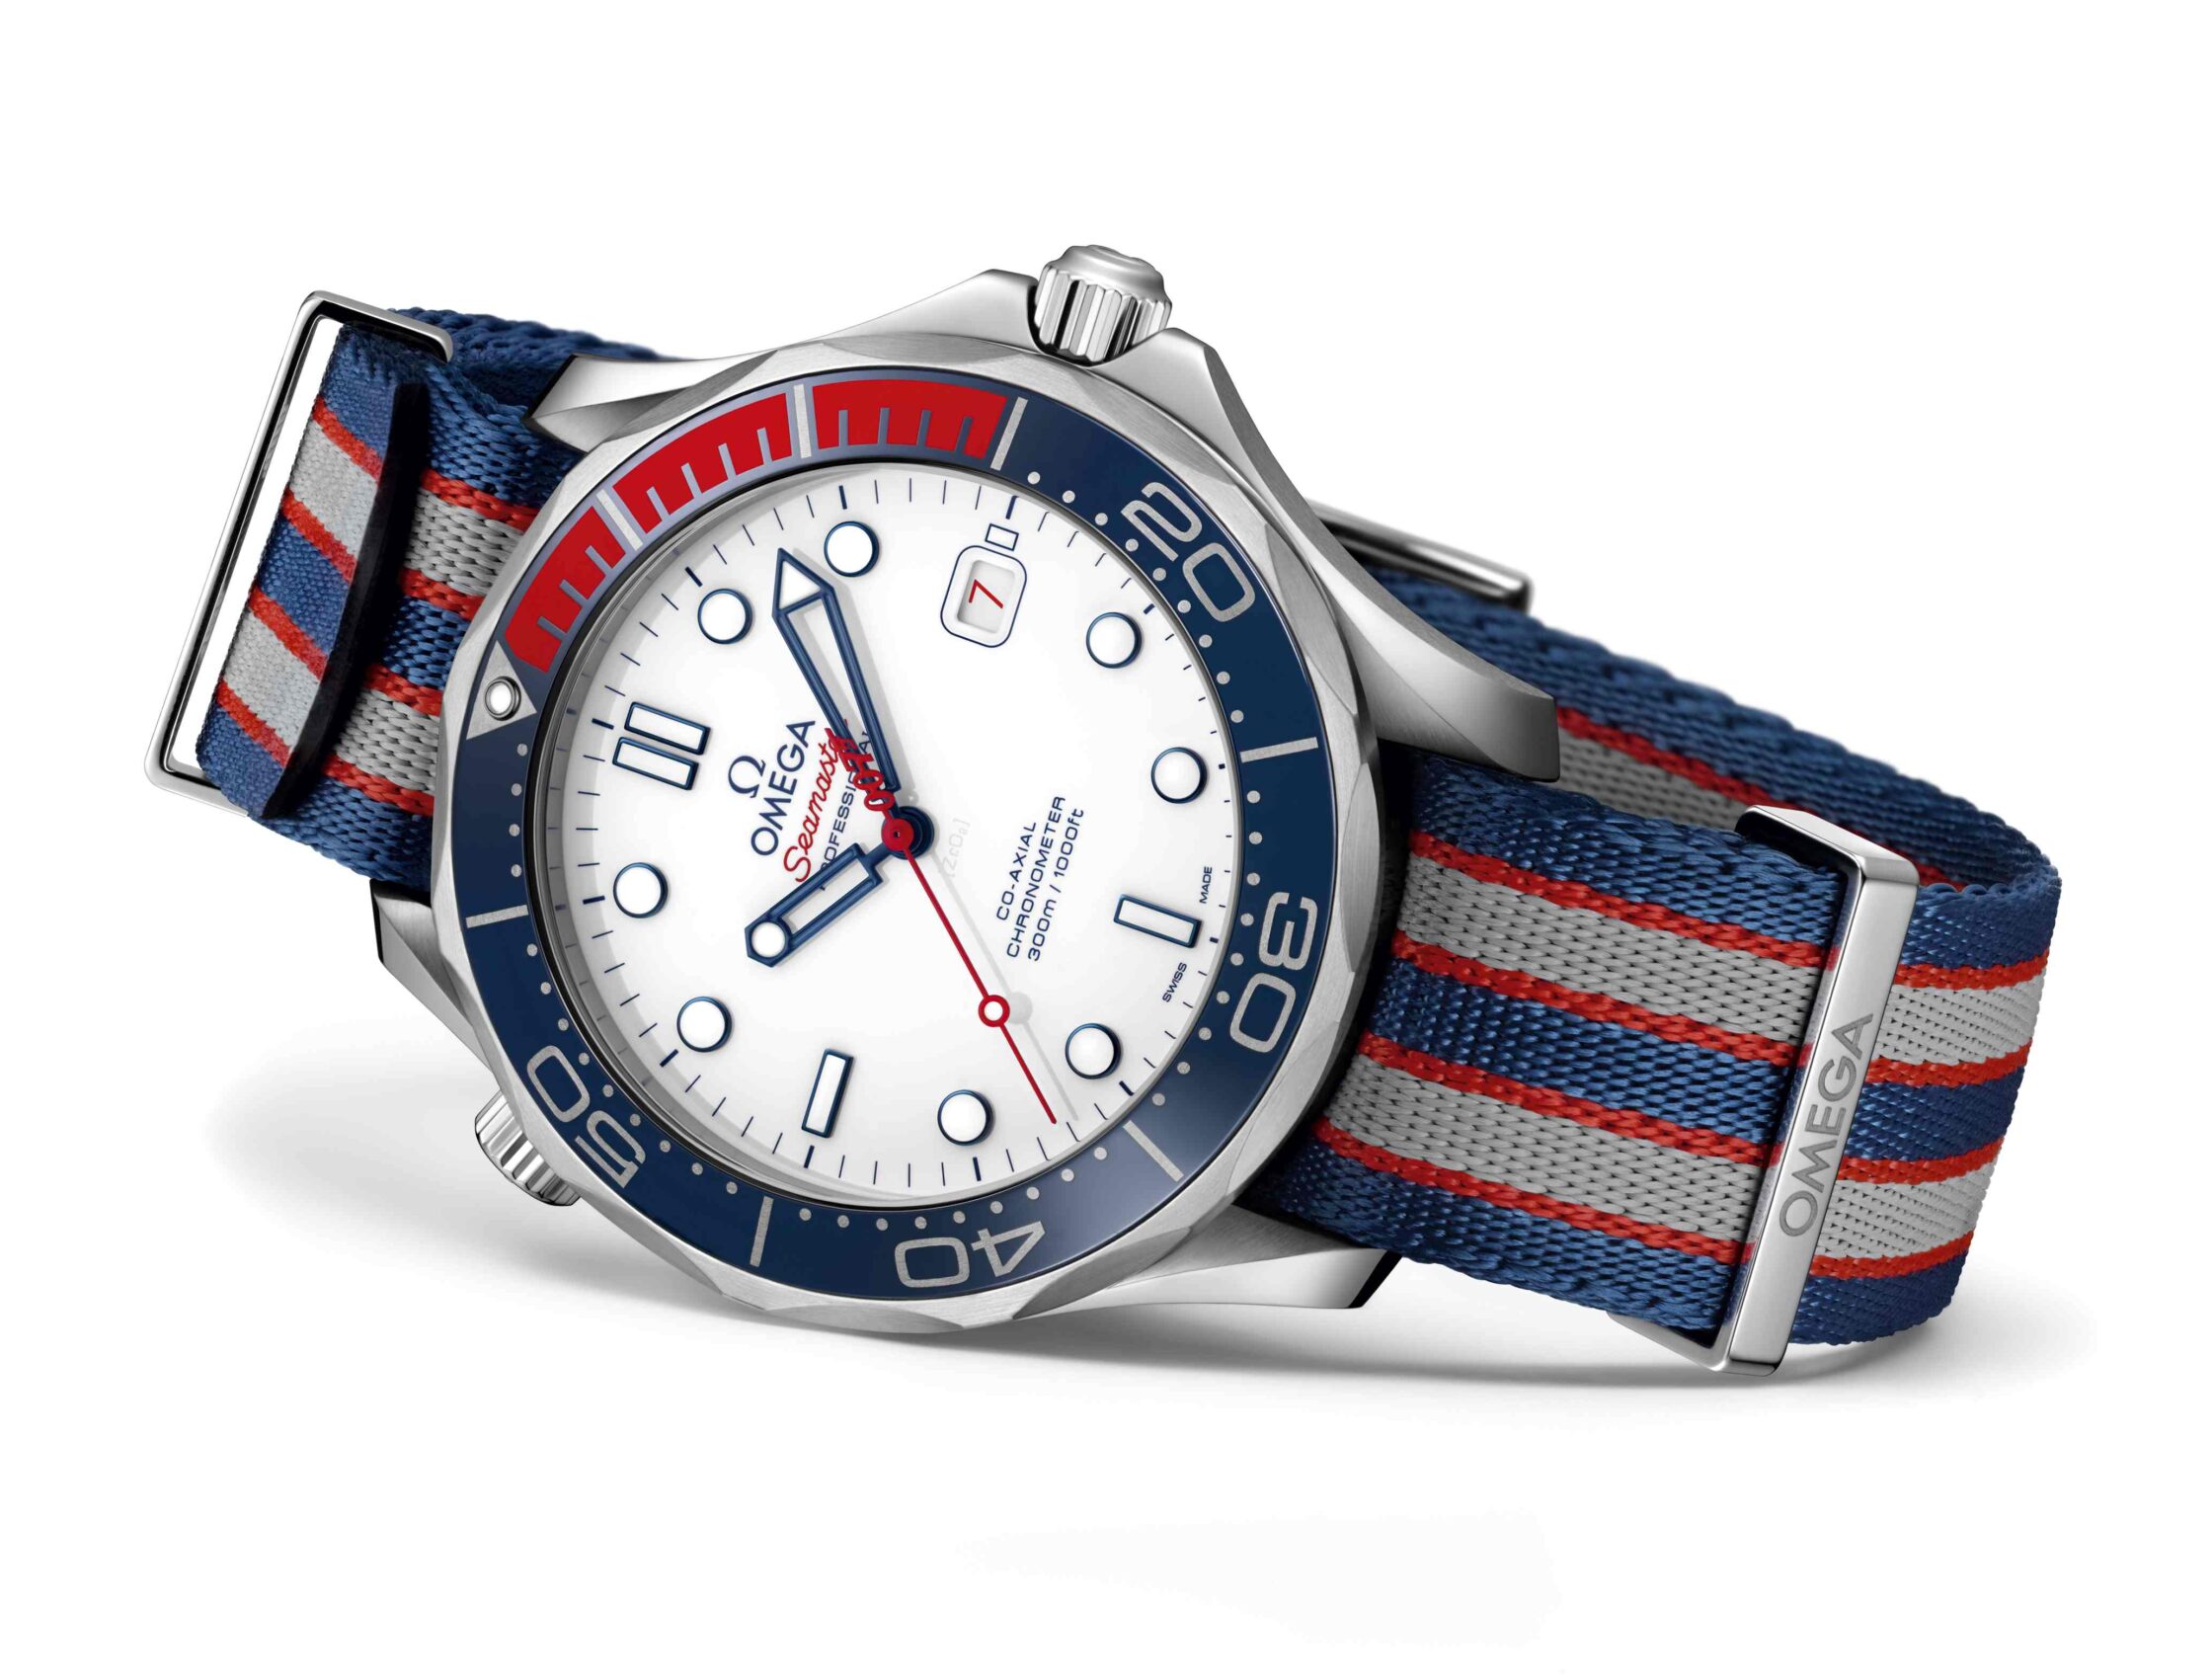 Omega Seamaster Diver 300M “Commander’s Watch” Limited Edition